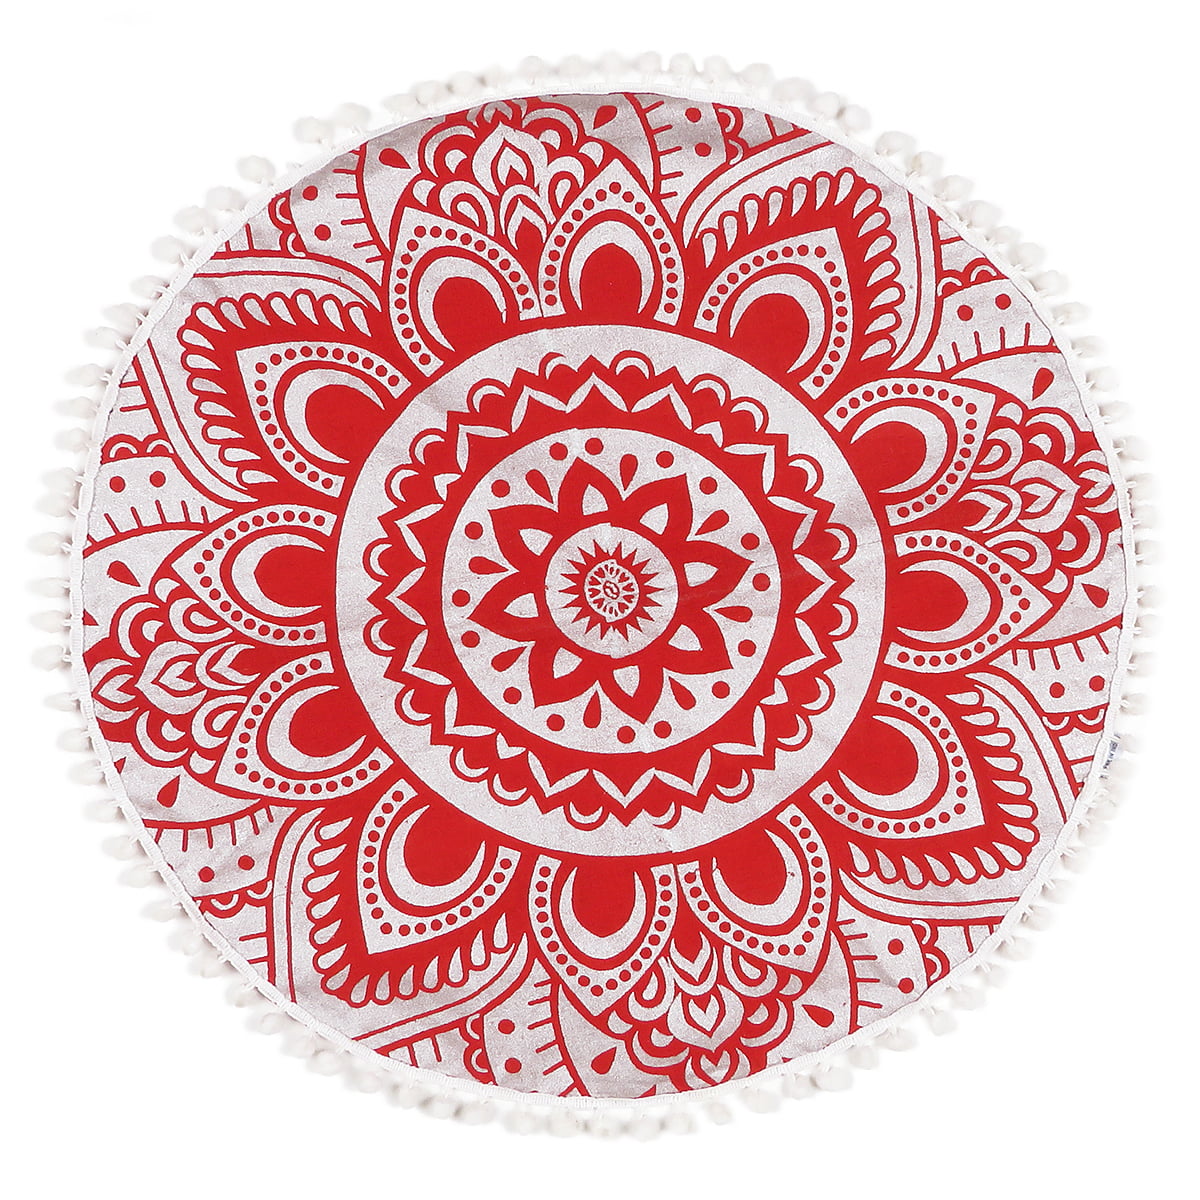 Details about   Cotton Square Floor Cushion Cover Star Mandala Elephant Design 35 Inches Indian 